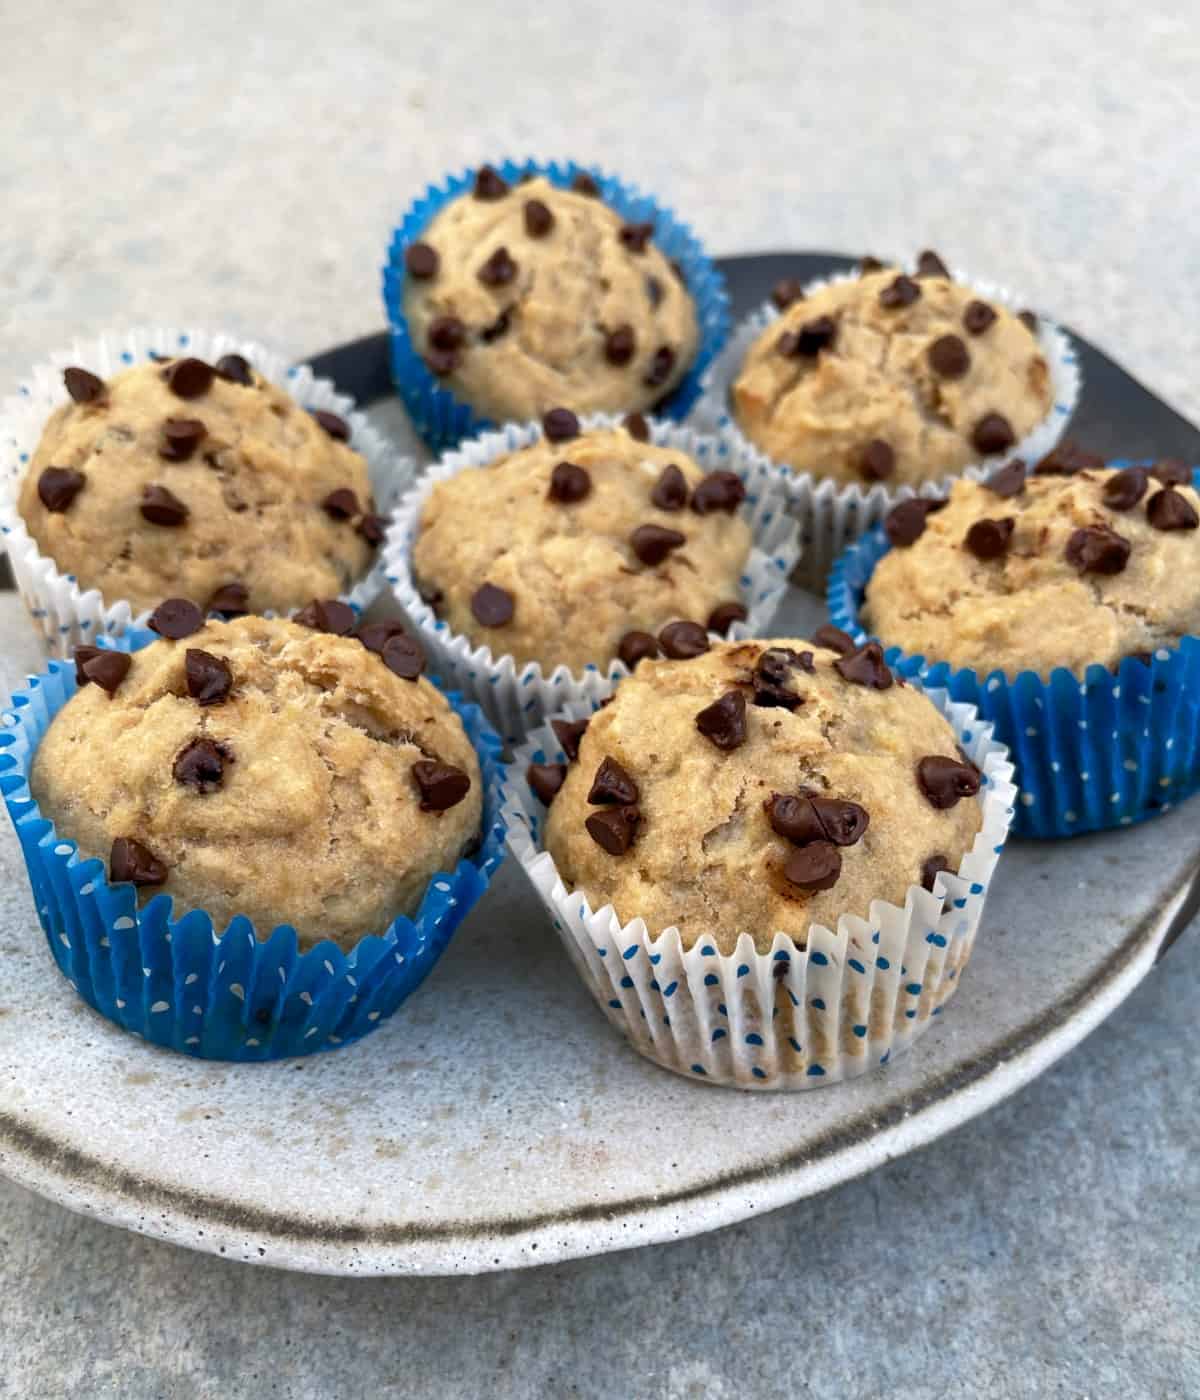 Banana Chocolate Chip Pancake Muffins in blue and white paper liners on ceramic serving platter.